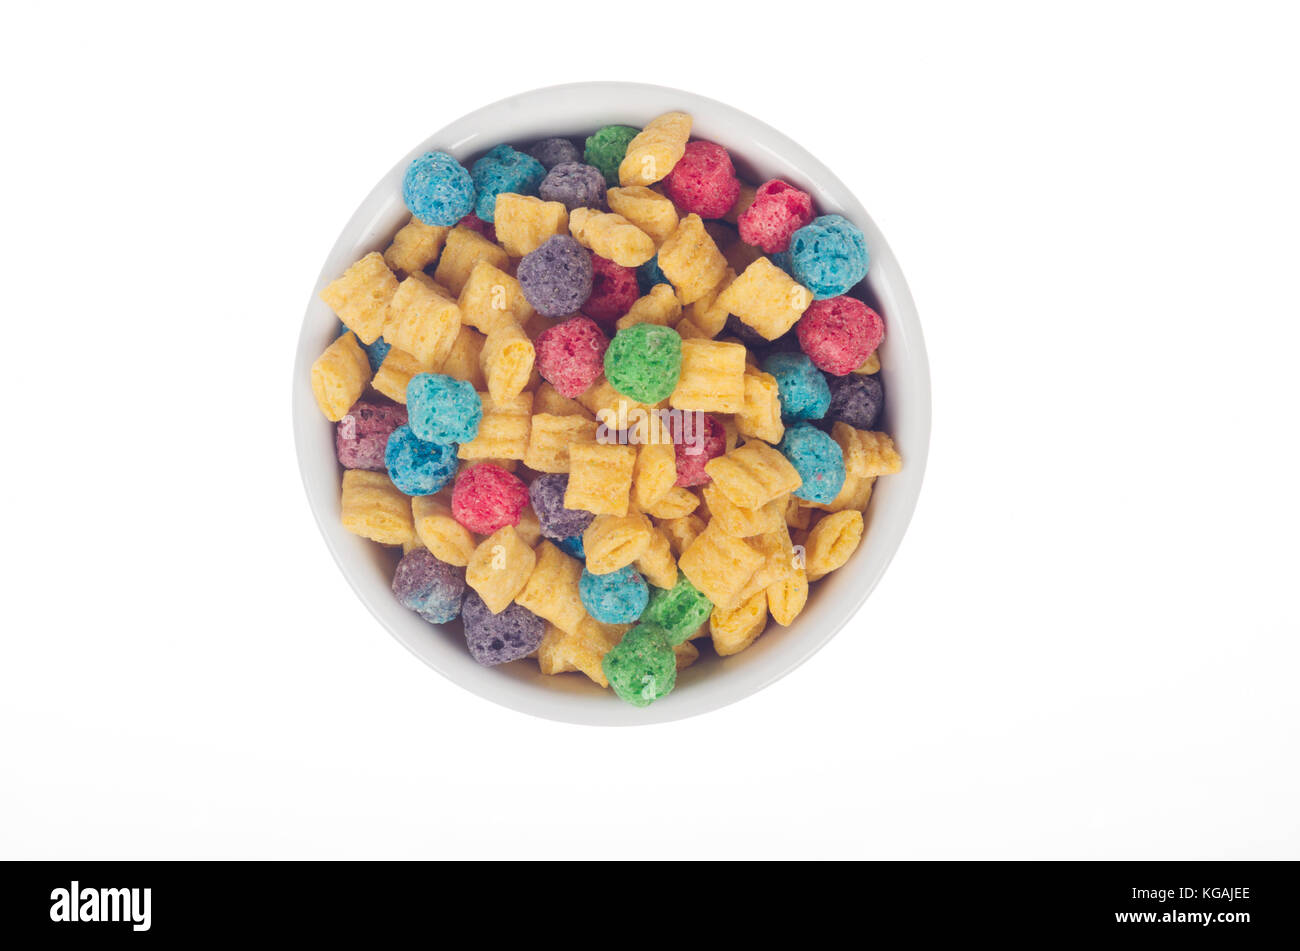 Bowl of Cap’n Crunch Berries cereal from Quaker Oats isolated on white background from above Stock Photo